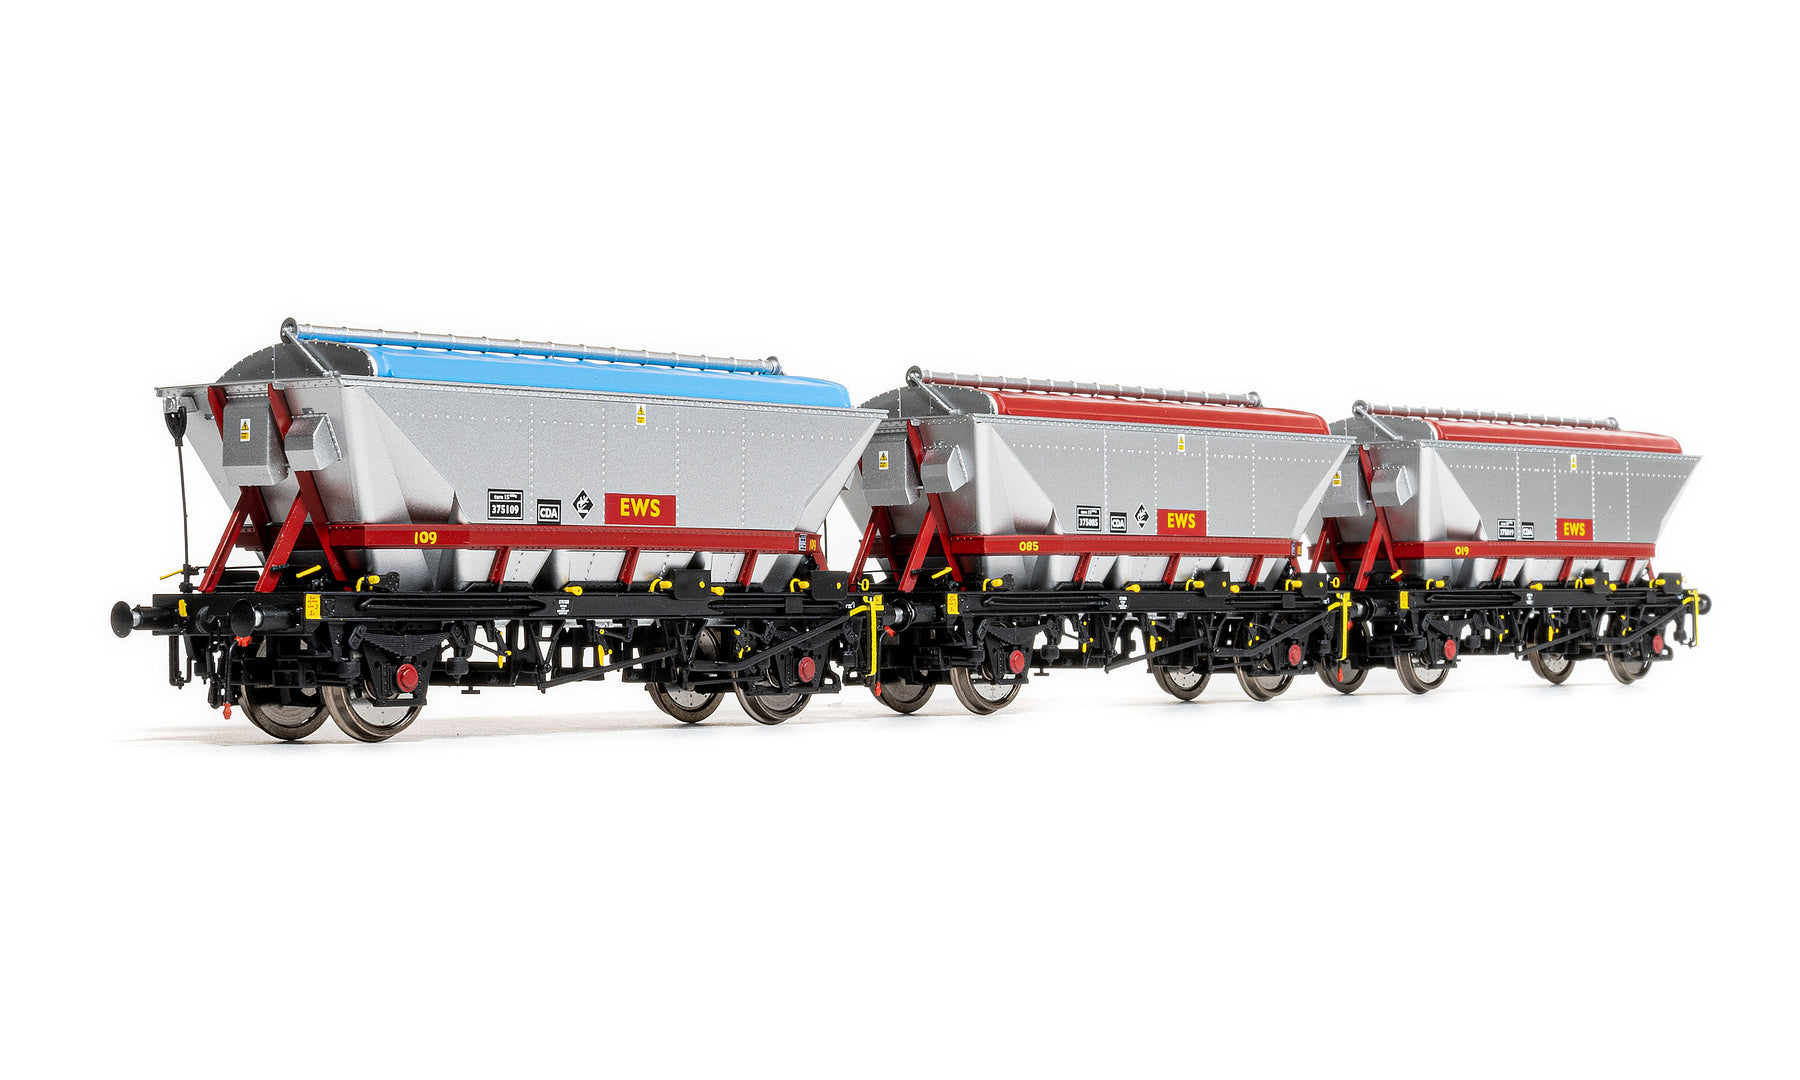 A First Look At Our CDA Wagons